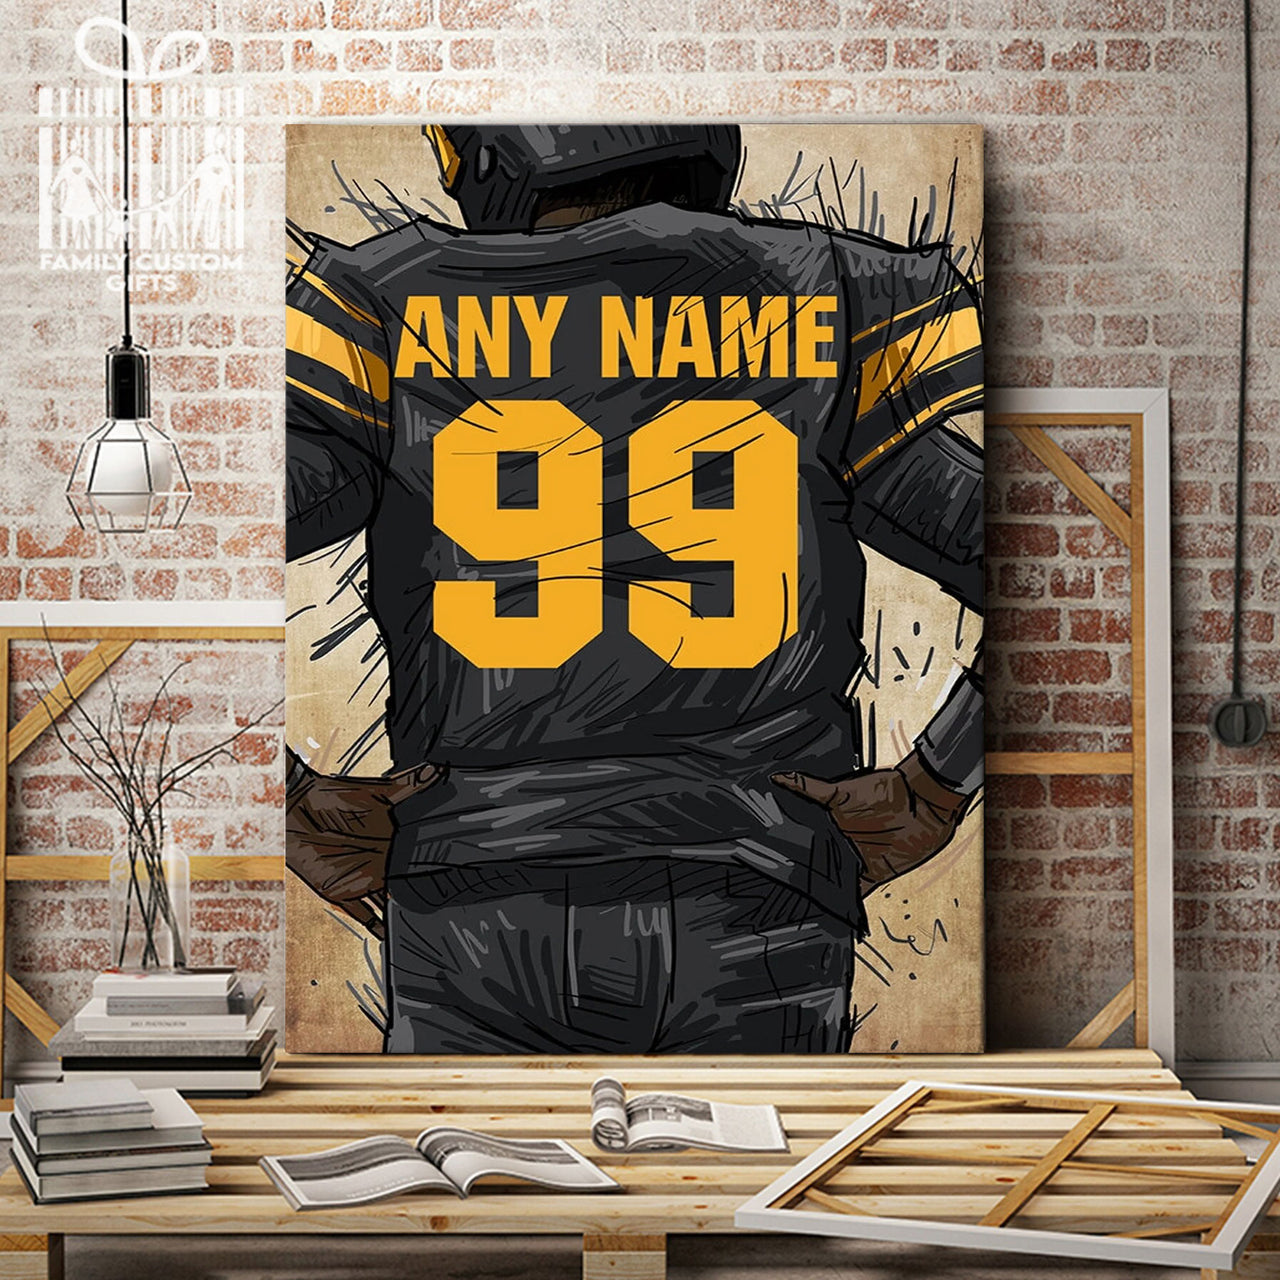 personalized pittsburgh steelers jersey